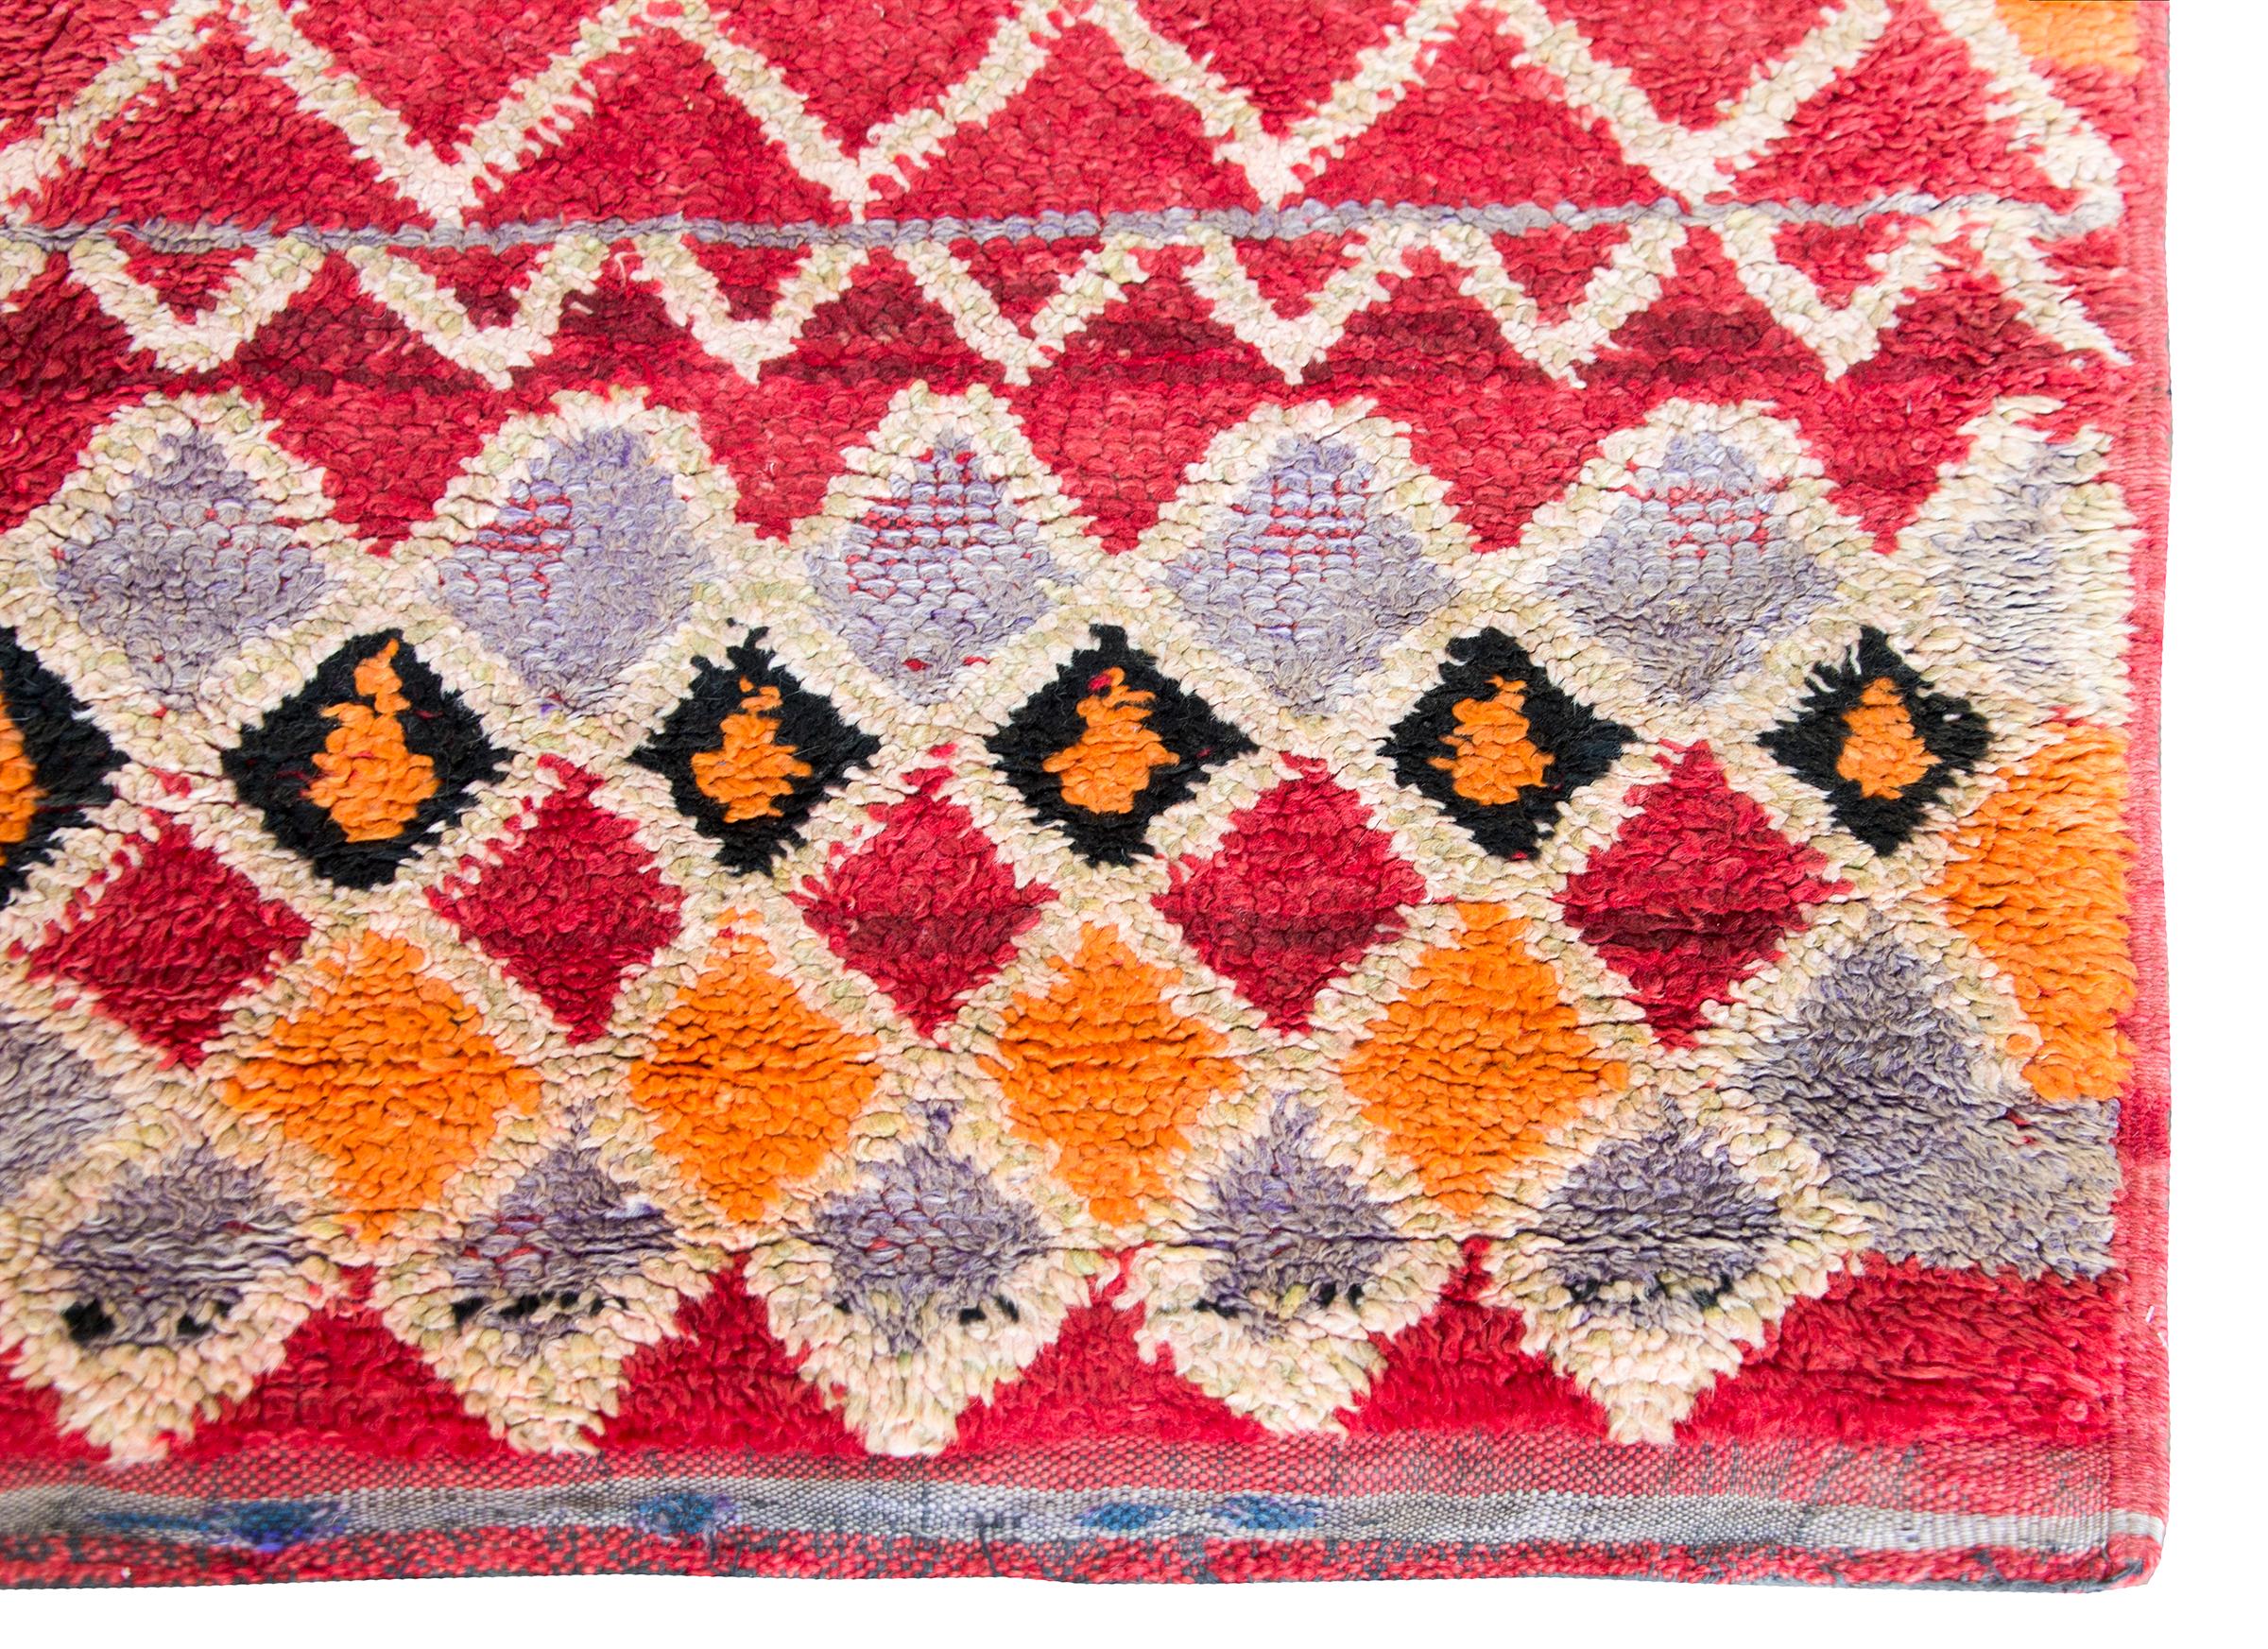 A bold and striking vintage mid-20th century Moroccan rug with an all-over diamond pattern woven in myriad colors including crimson, orange, pink, pale lavender, and black wool.